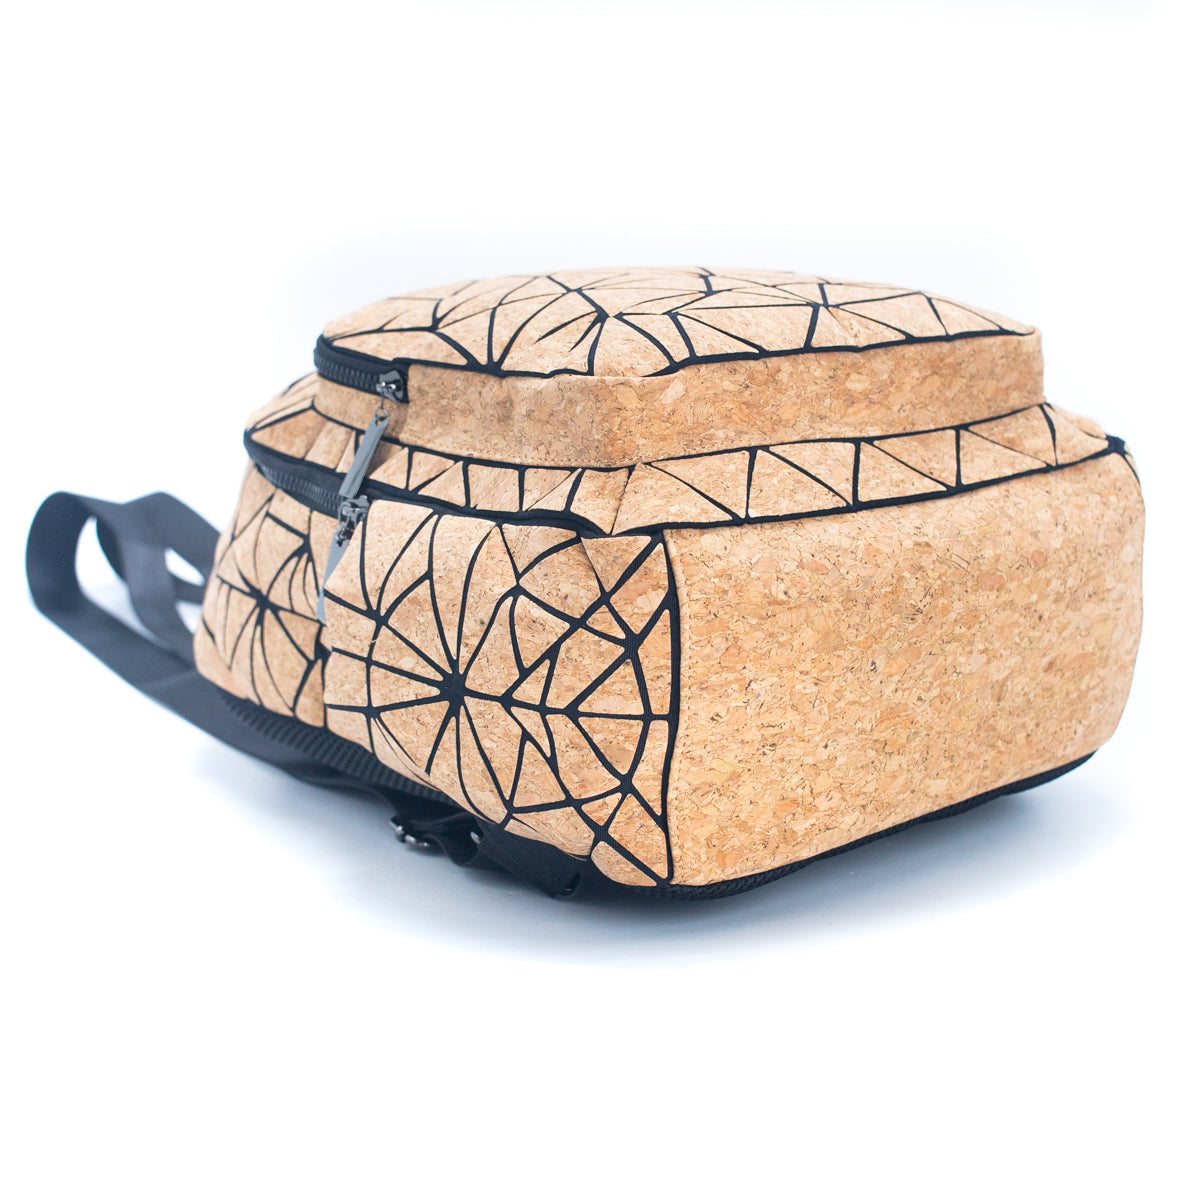 Compact Web Cork Vegan Backpack | THE CORK COLLECTION